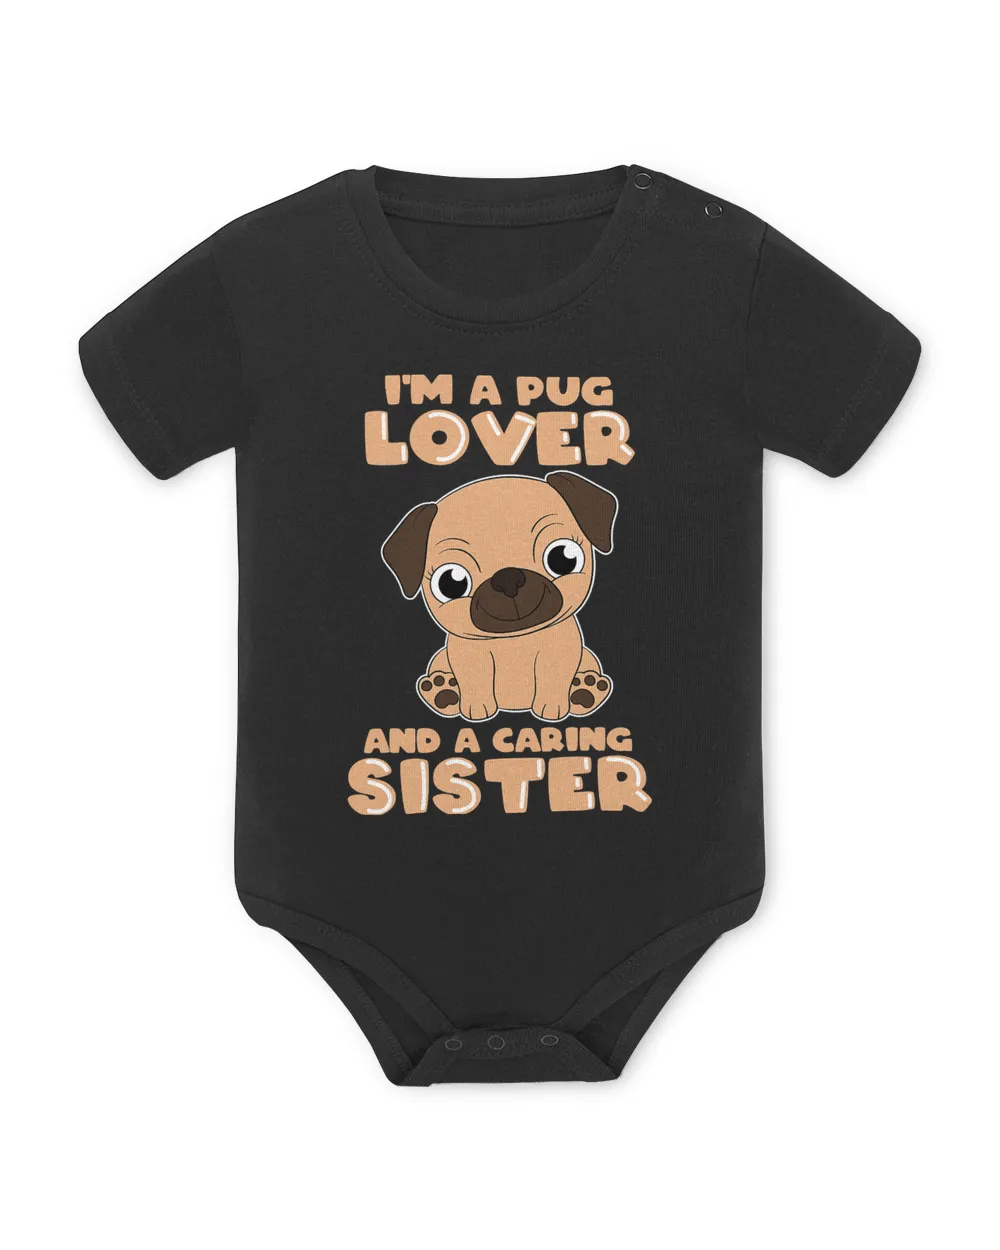 I'm a Pug Lover and a caring Sister Cute Pug T-Shirt